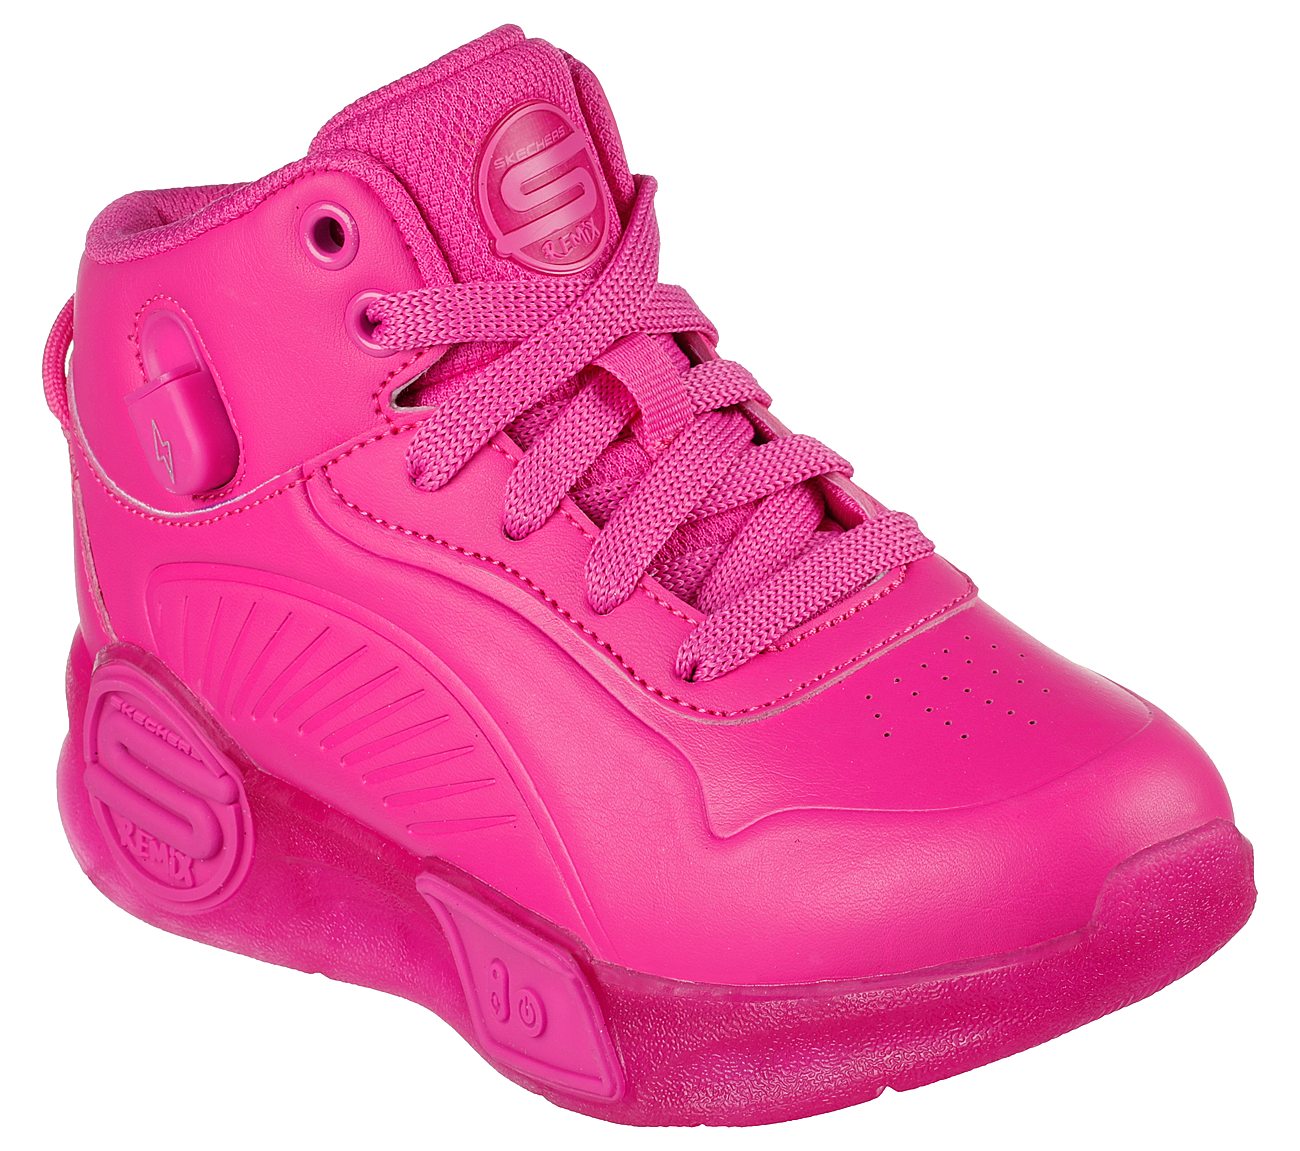 S-LIGHTS REMIX, HHOT PINK Footwear Right View